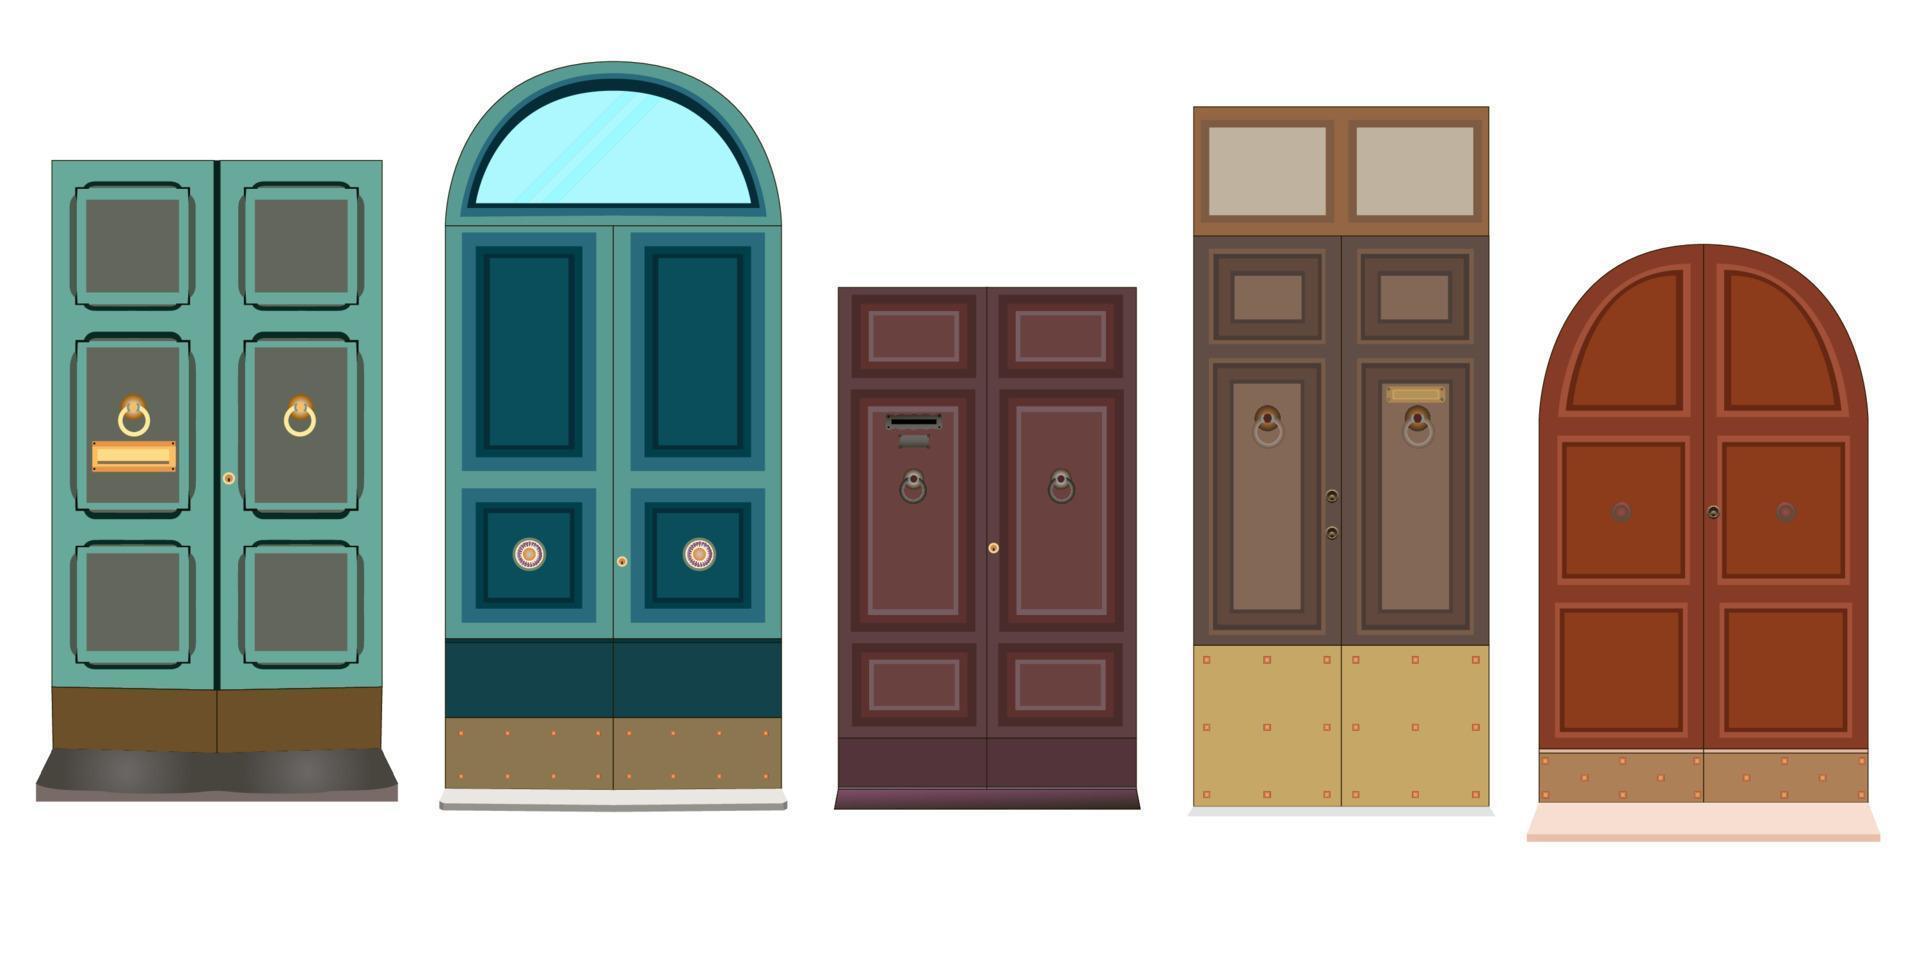 Decorative doorway and various retro doors. Vector clip art set of doors for the home. Illustration of entrance and exit doors